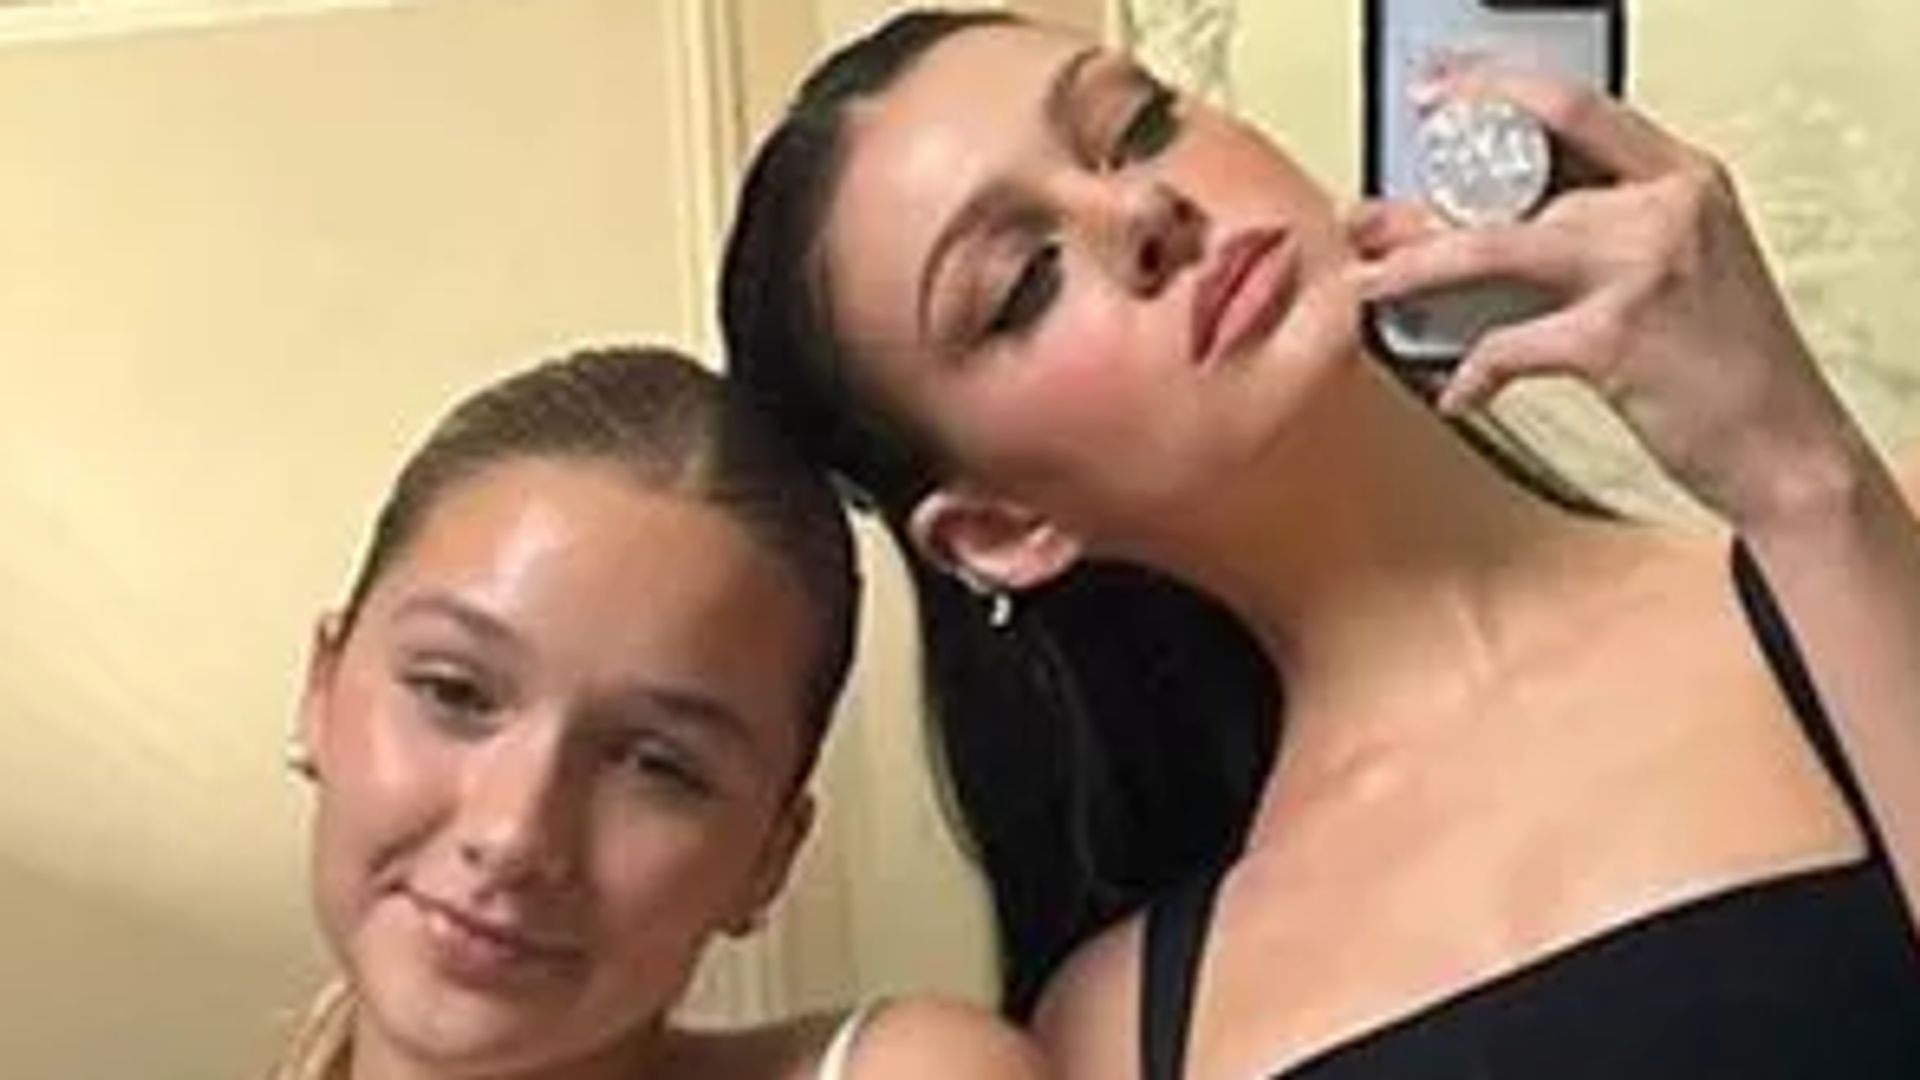 Harper Beckham and sister-in-law Nicola Peltz twin with glossy straight hair in new photo